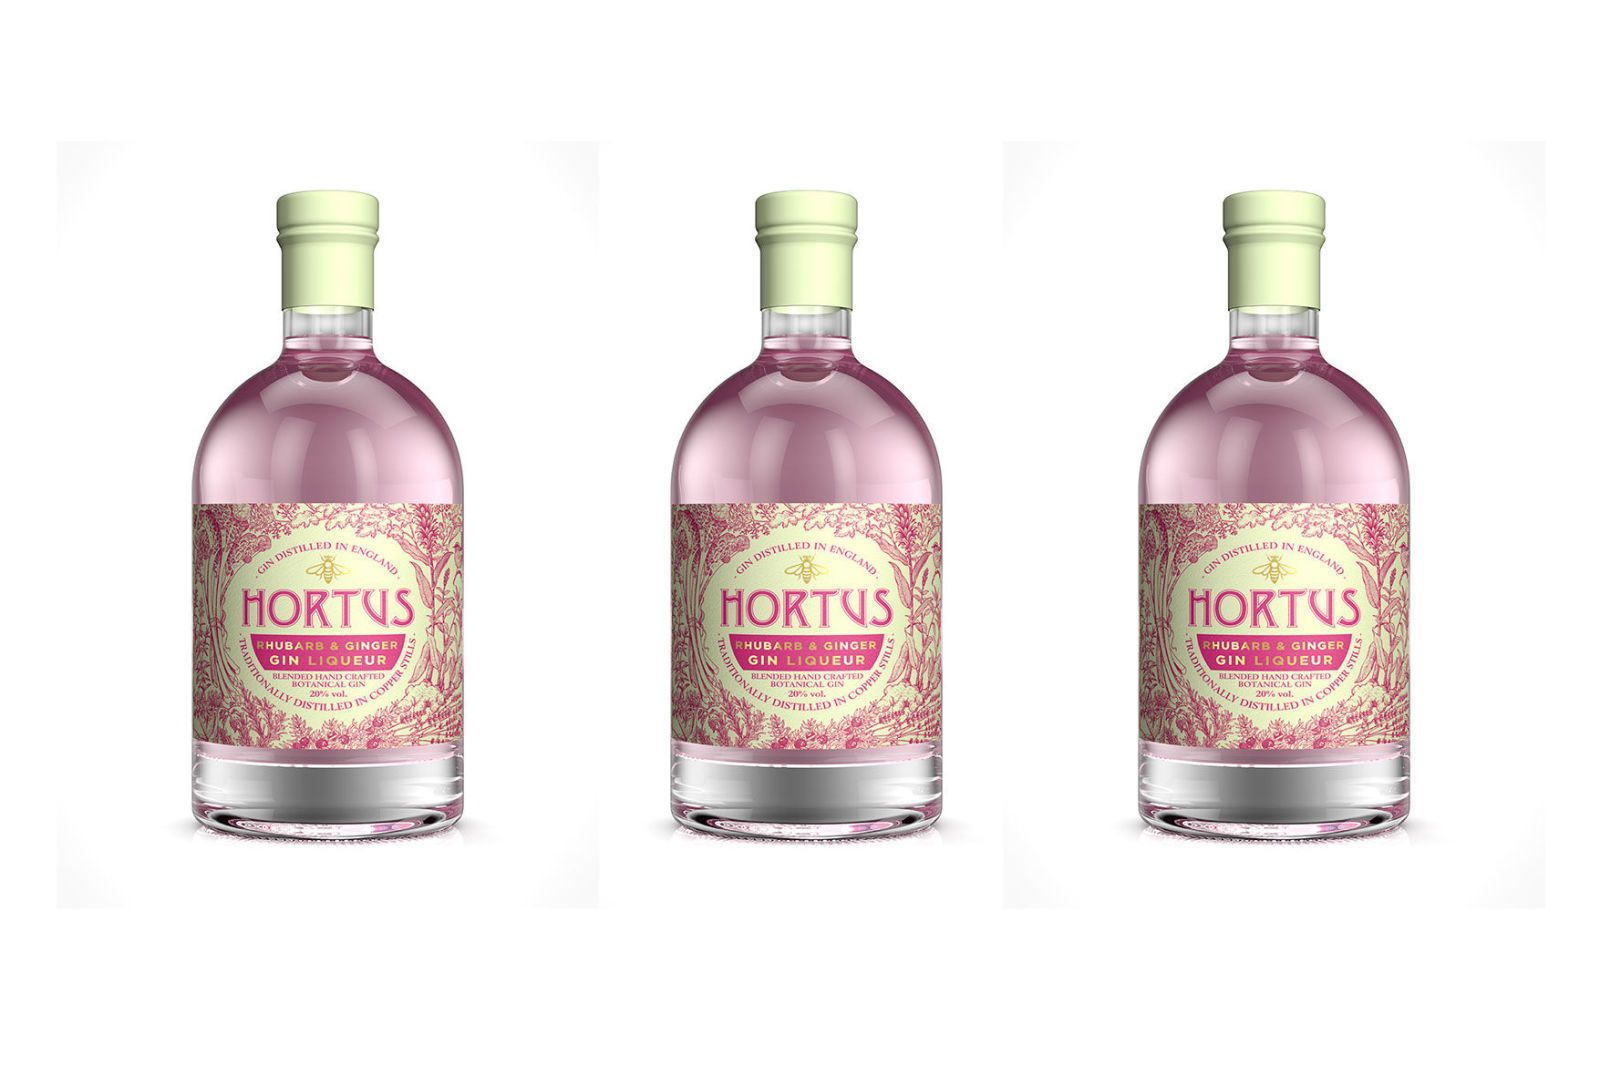 Hortus rhubarb and ginger gin Lidl